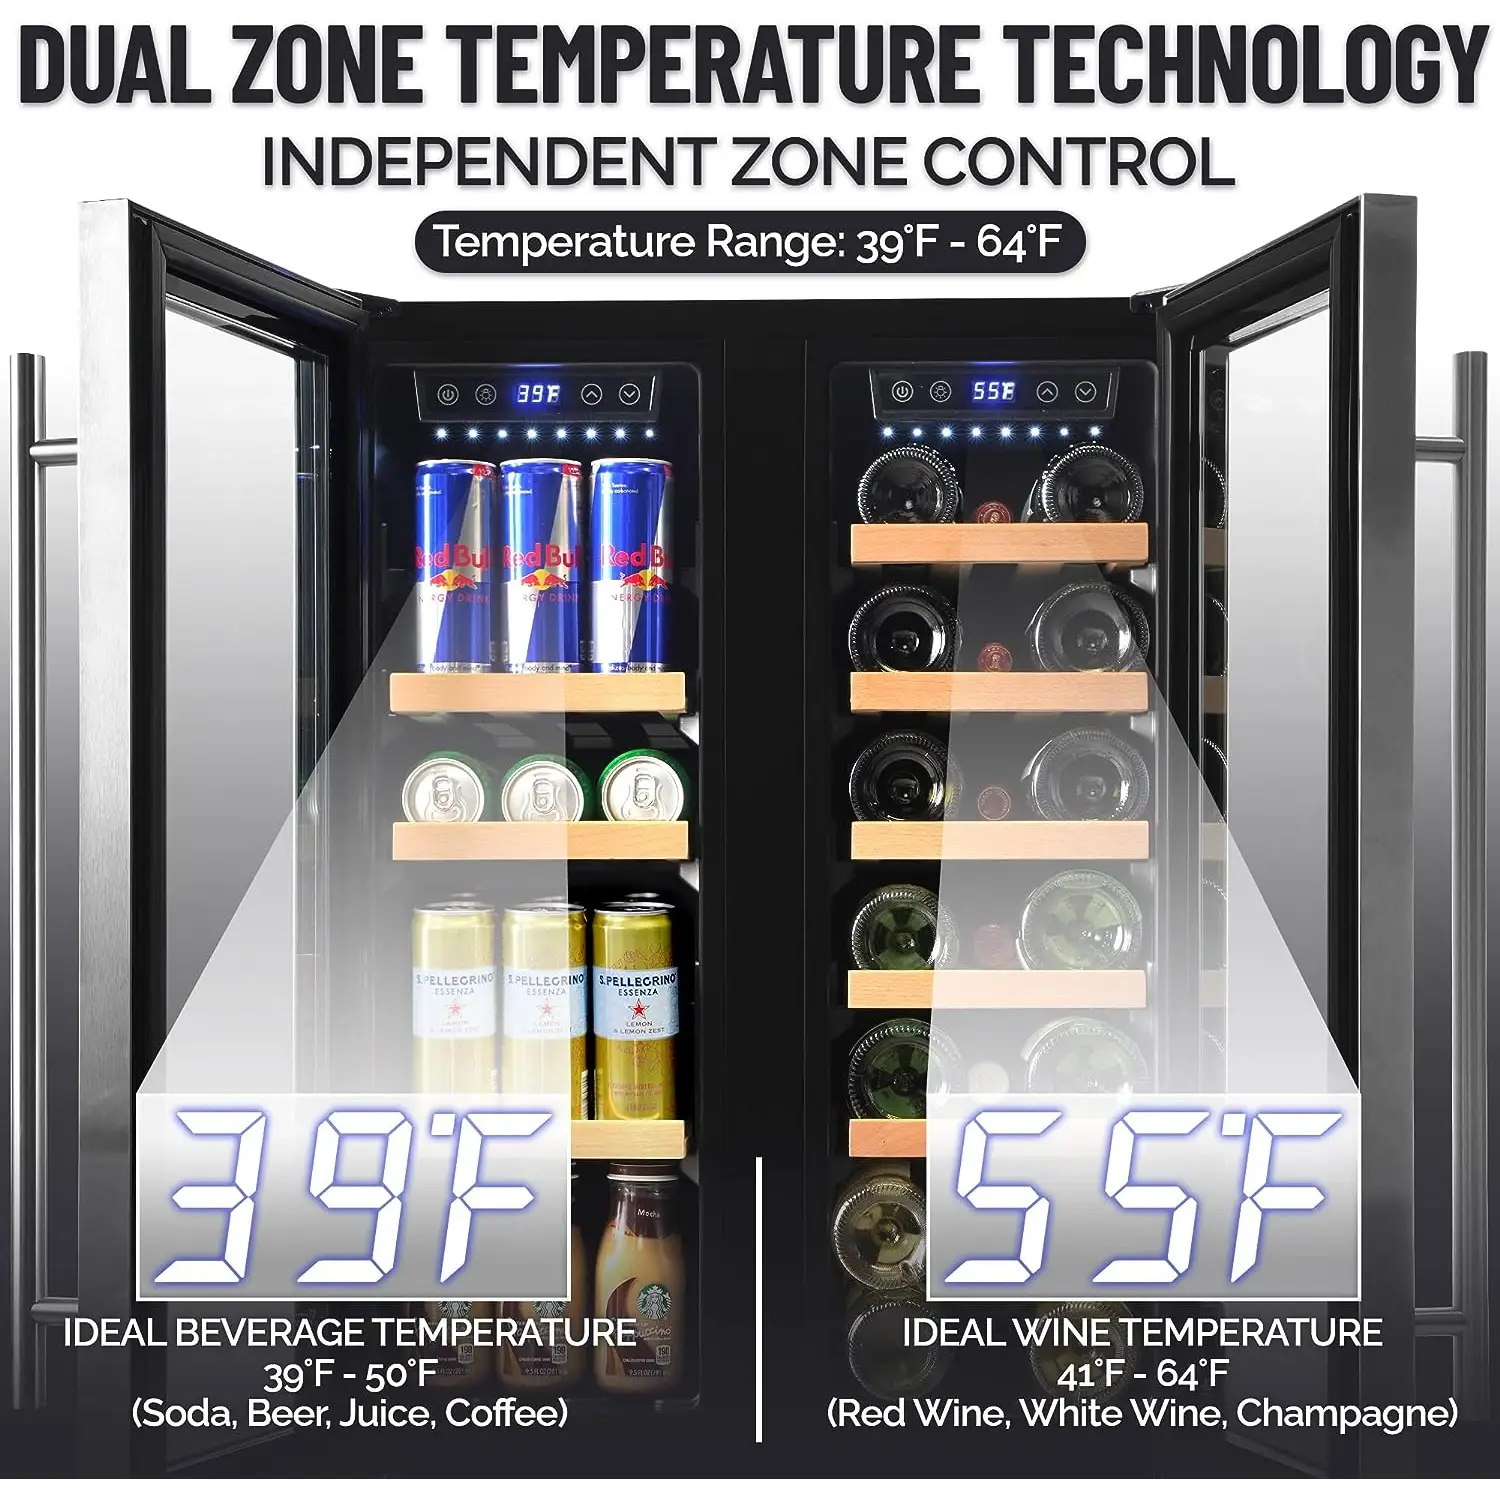 Zulay  Dual Zone Wine Cooler Refrigerator - Stainless Steel Beverage Refrigerator with Glass